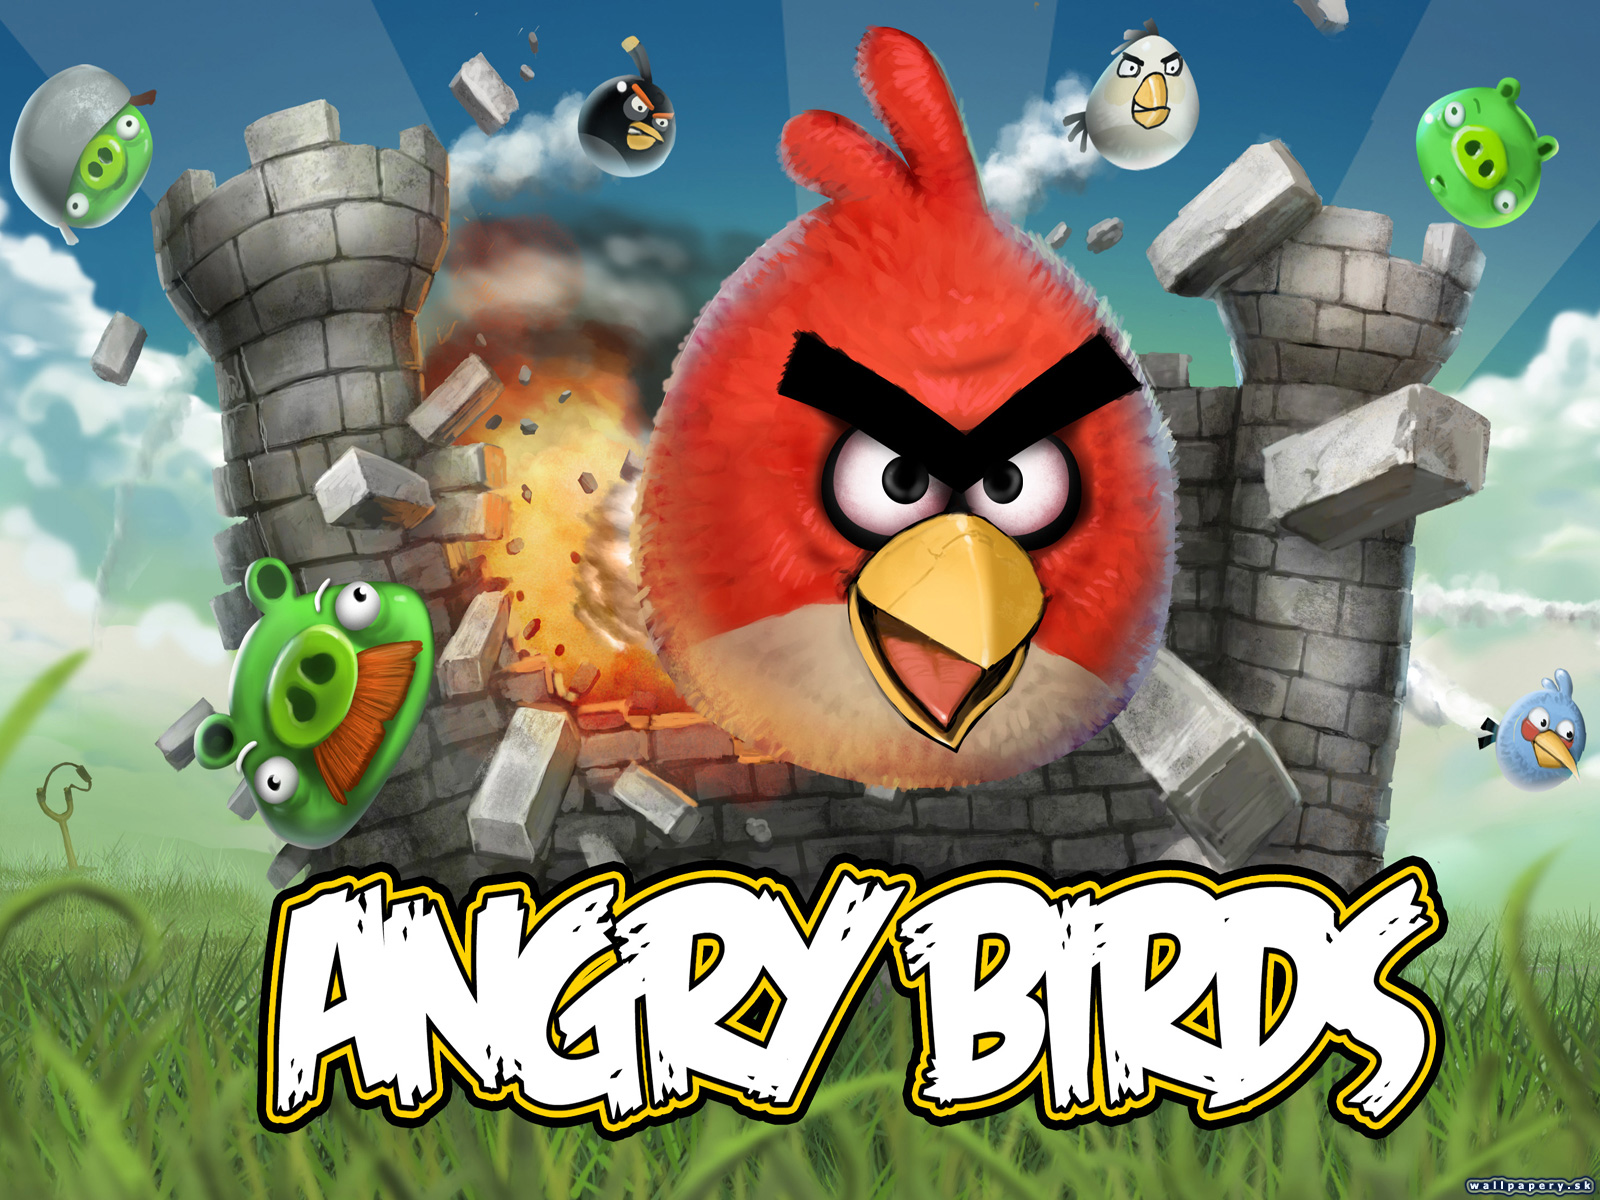 Angry Birds - wallpaper 2